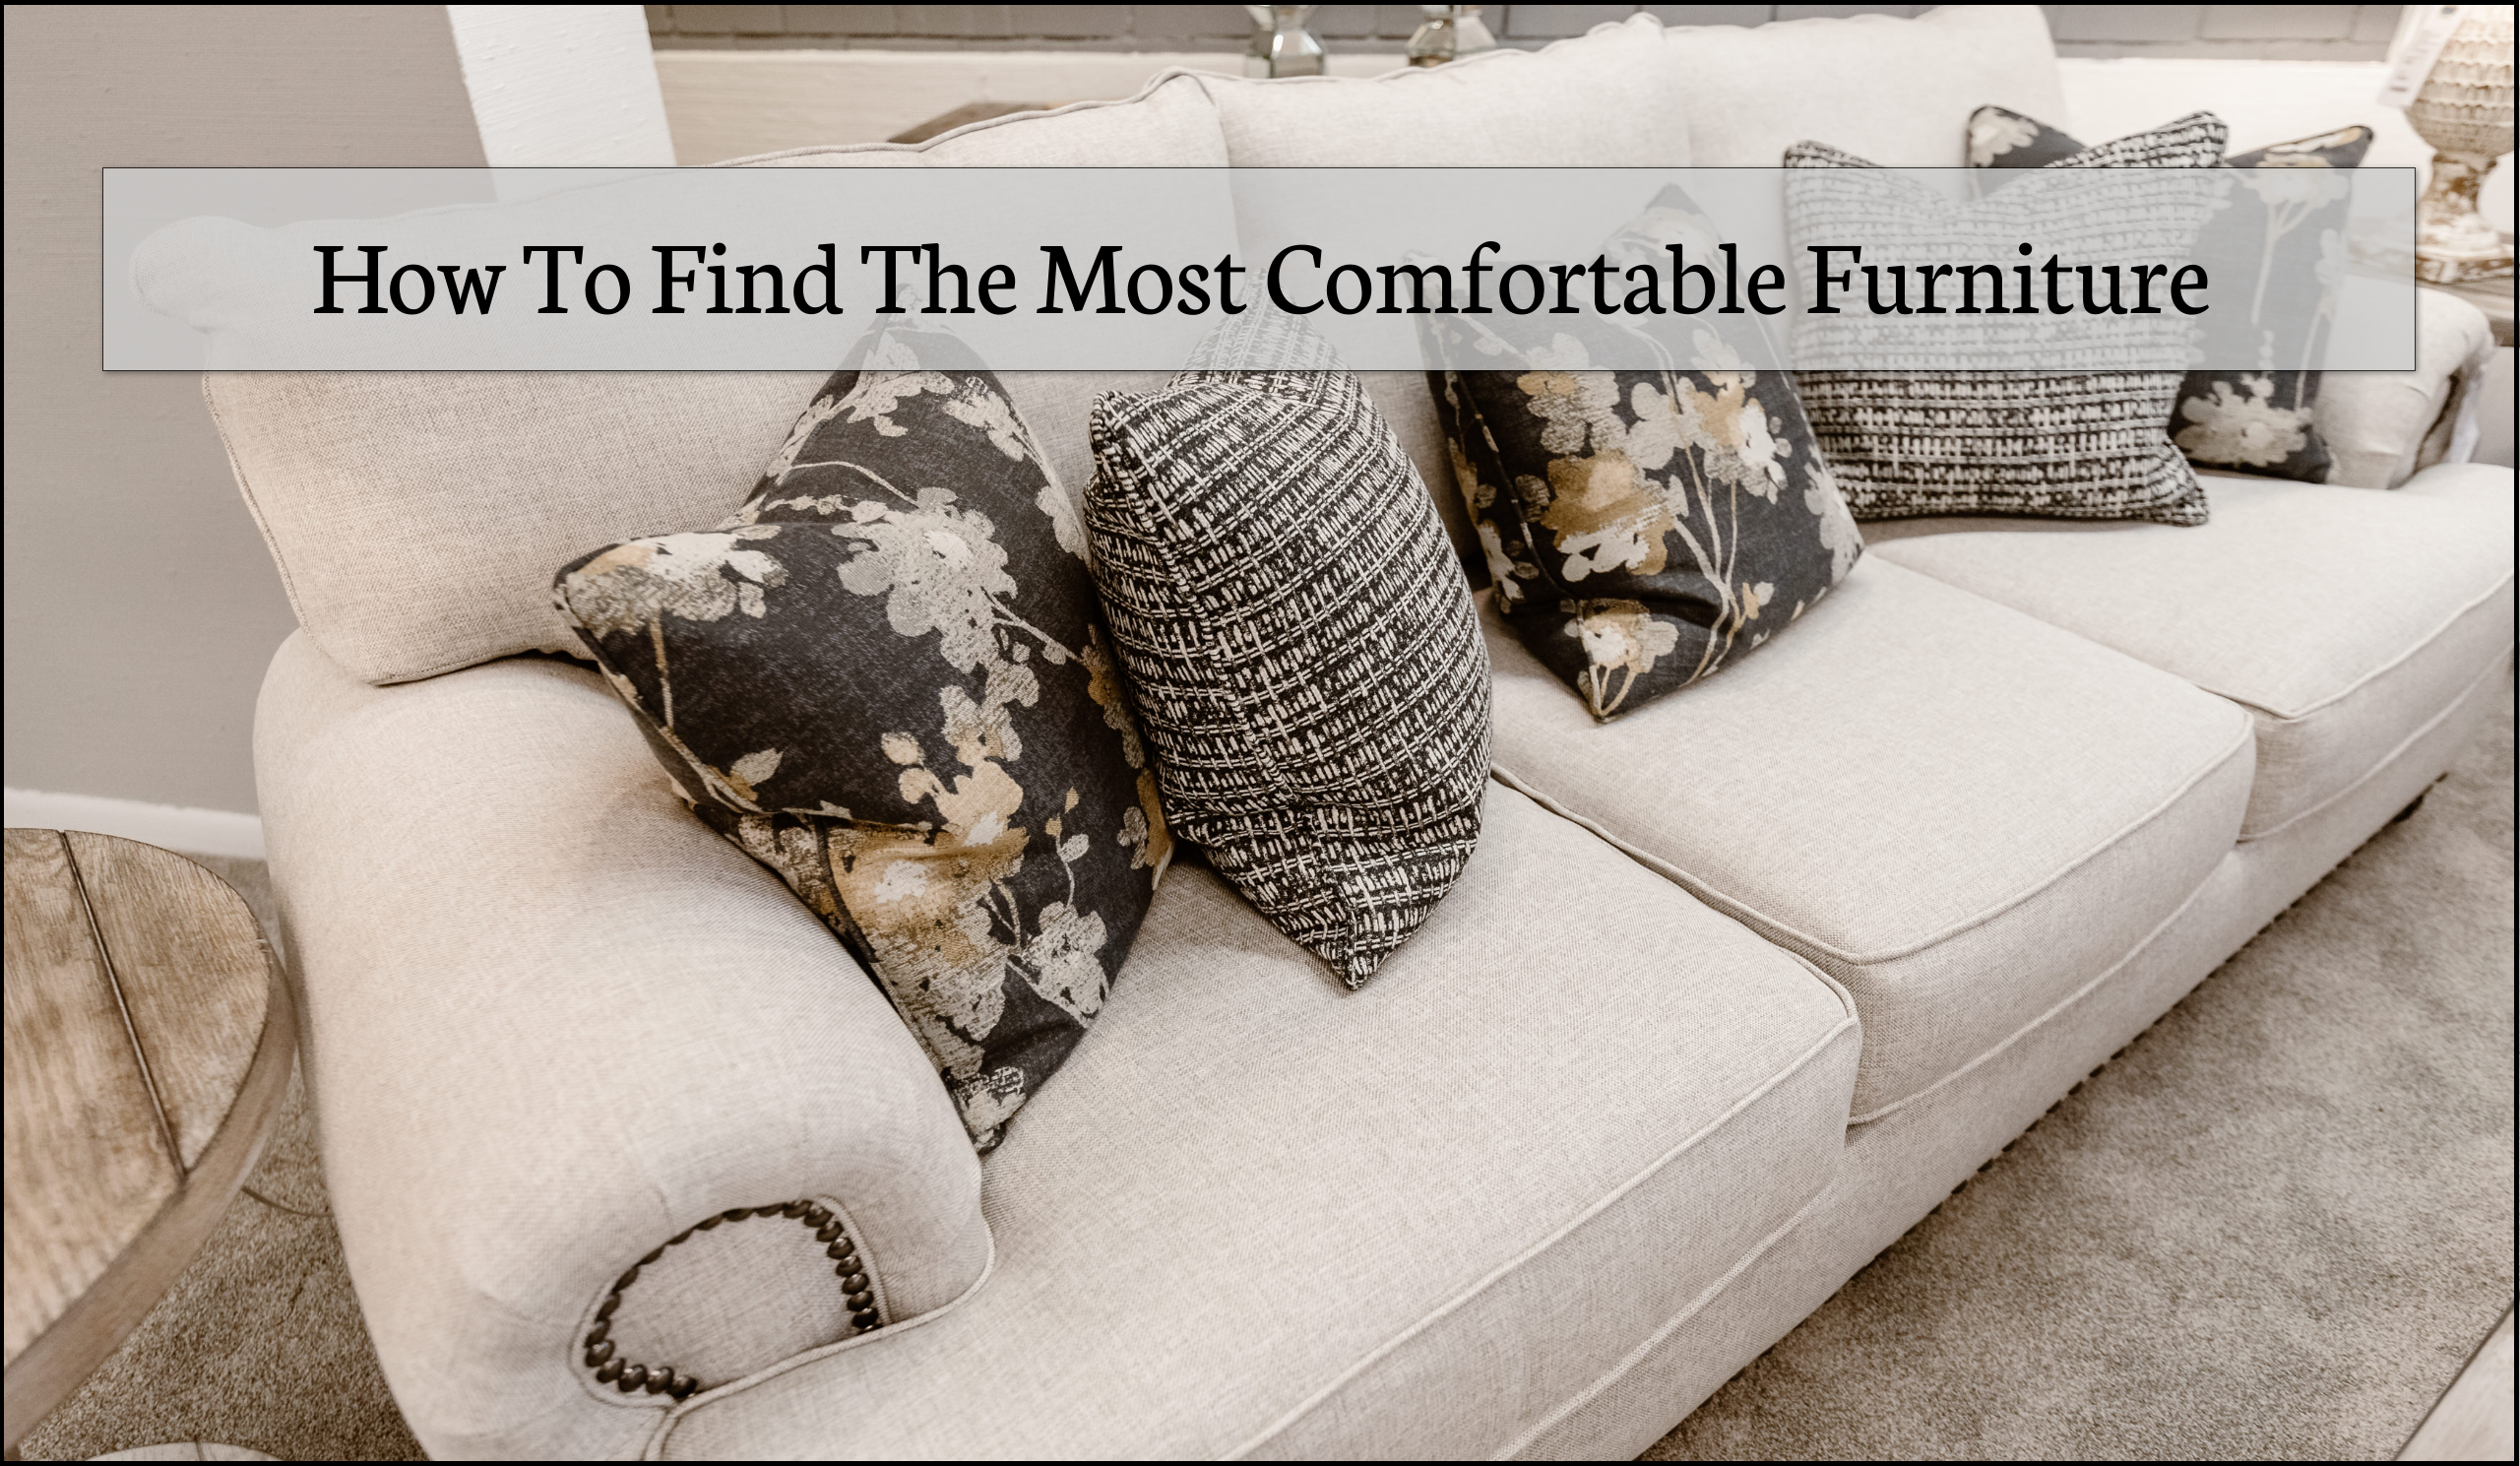 How To Find The Most Comfortable Furniture – Dec. 2021